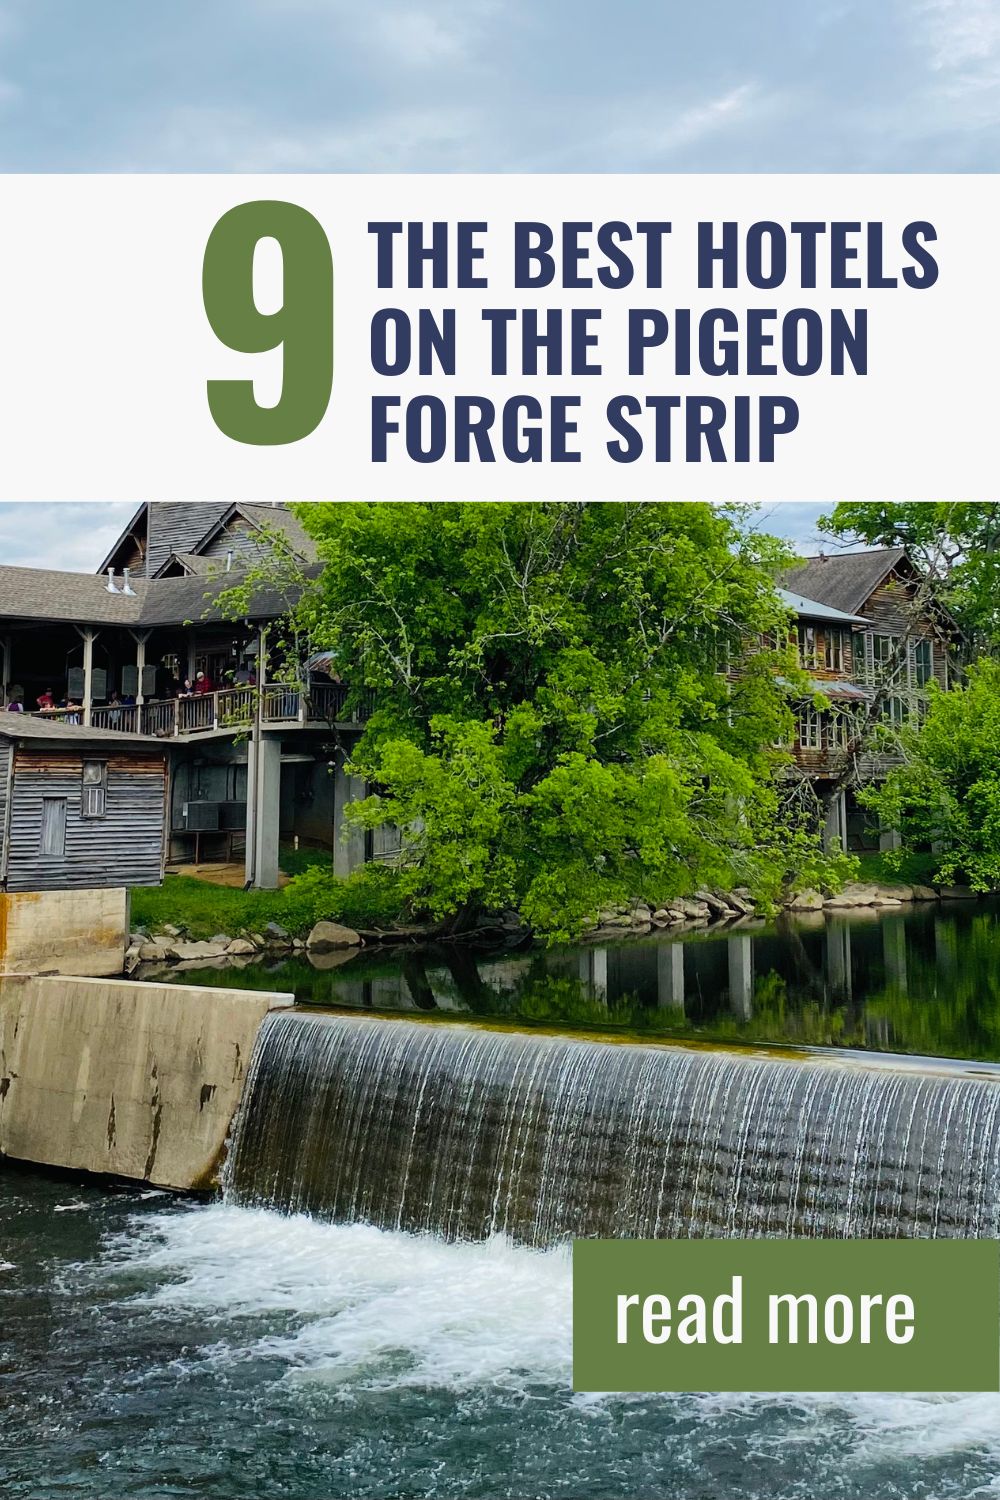 Pigeon Forge hotels